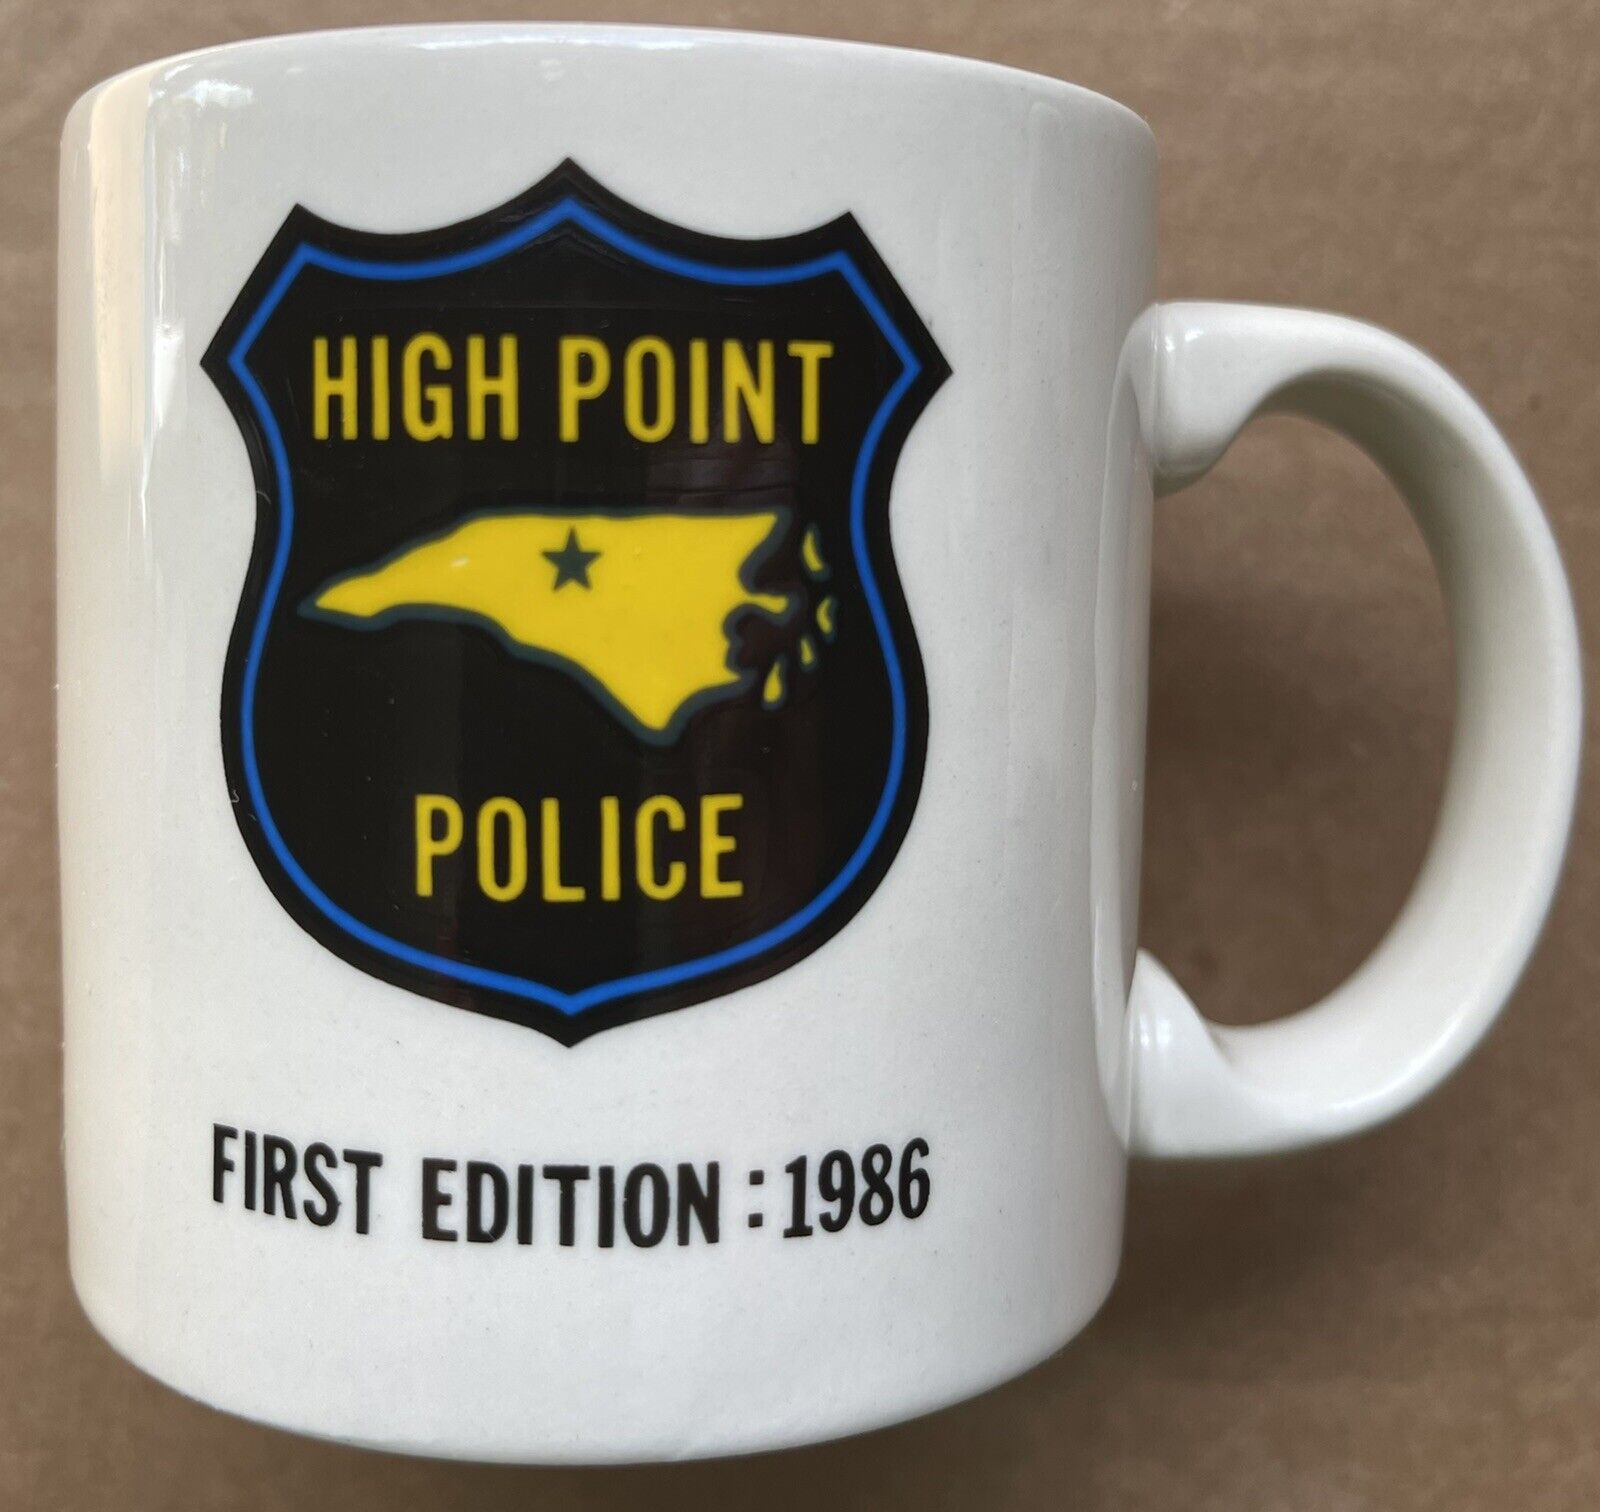 1986 High Point Police Department Coffee Mug, First Edition, High Point, Nc